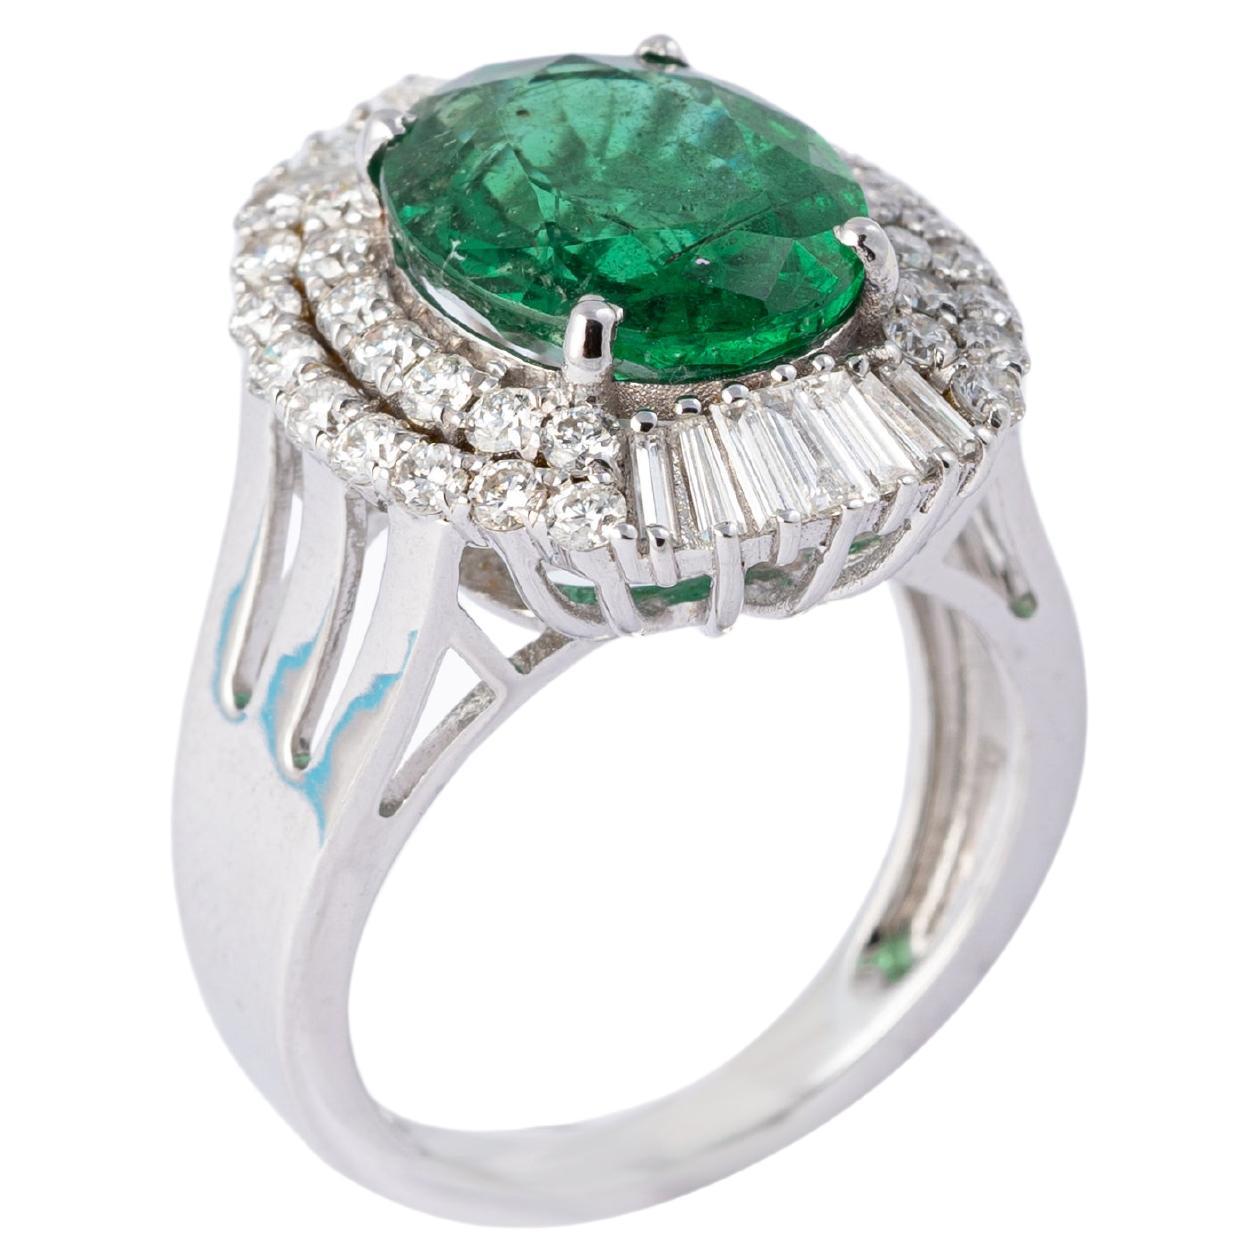 Natural Zambian Emerald 4.54 cts with Diamonds 1.47cts ring and 14k Gold